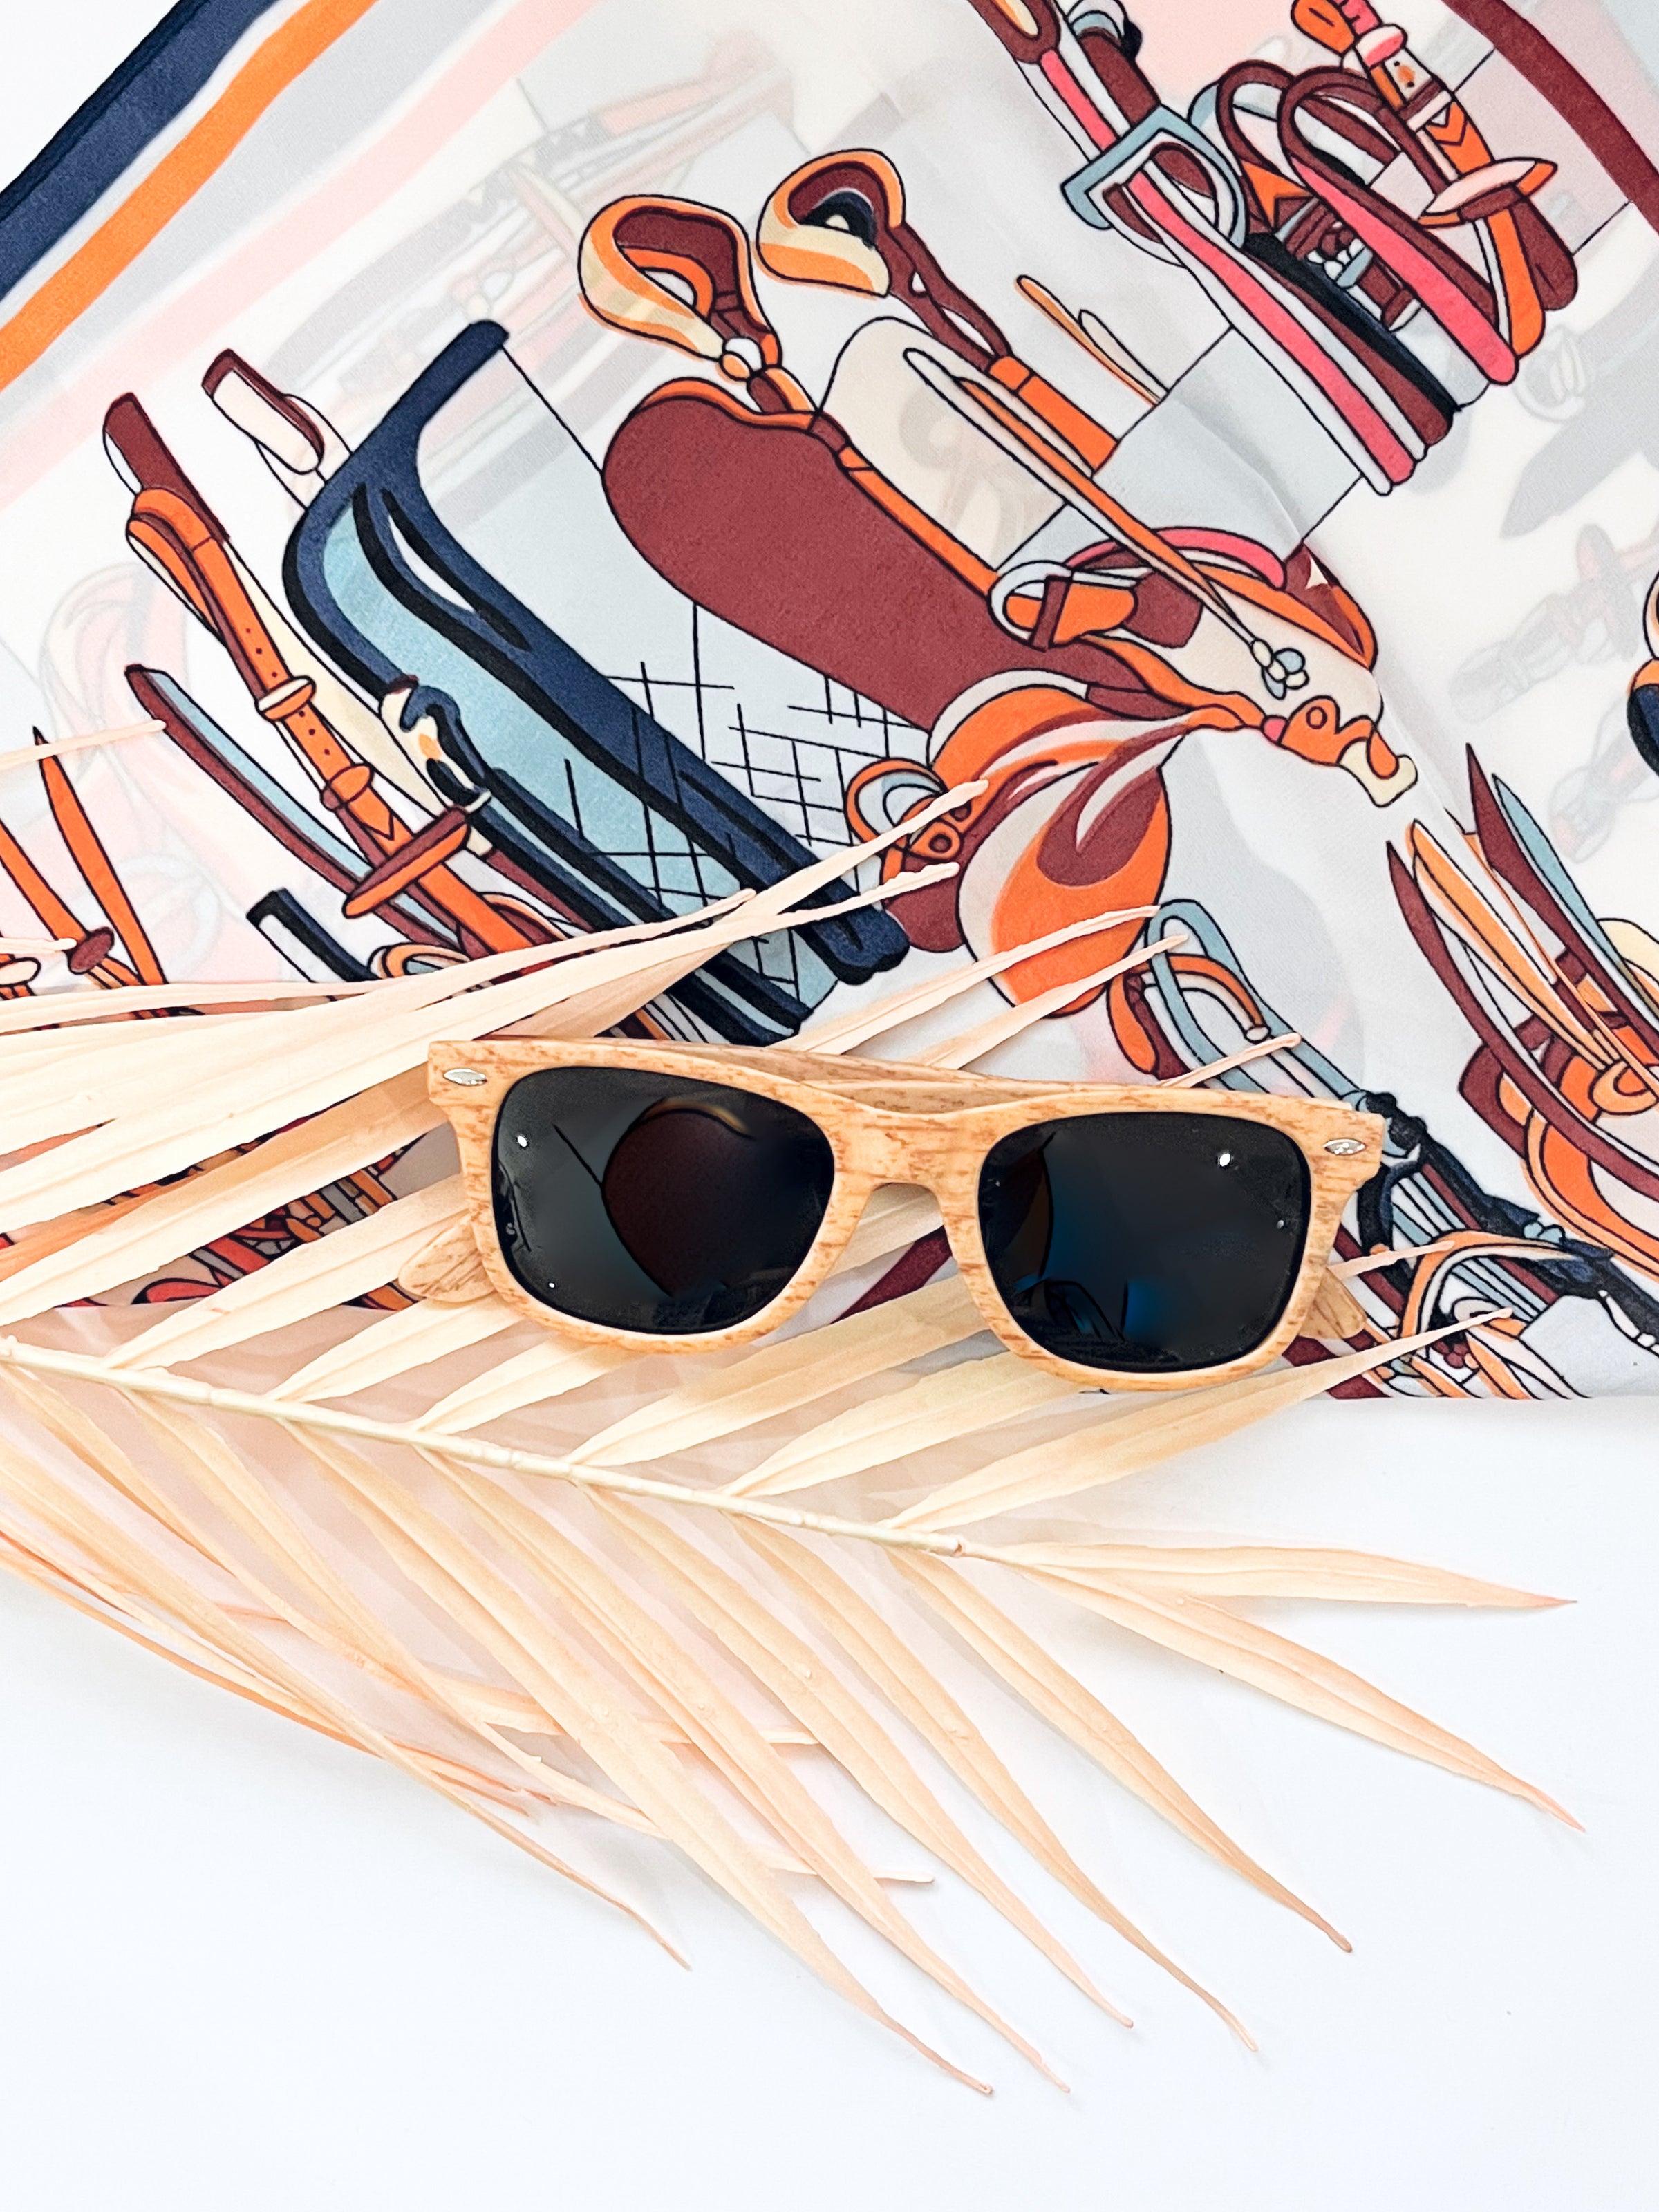 New York Sunglasses-260 Other Accessories-Coastal Bloom-Coastal Bloom Boutique, find the trendiest versions of the popular styles and looks Located in Indialantic, FL